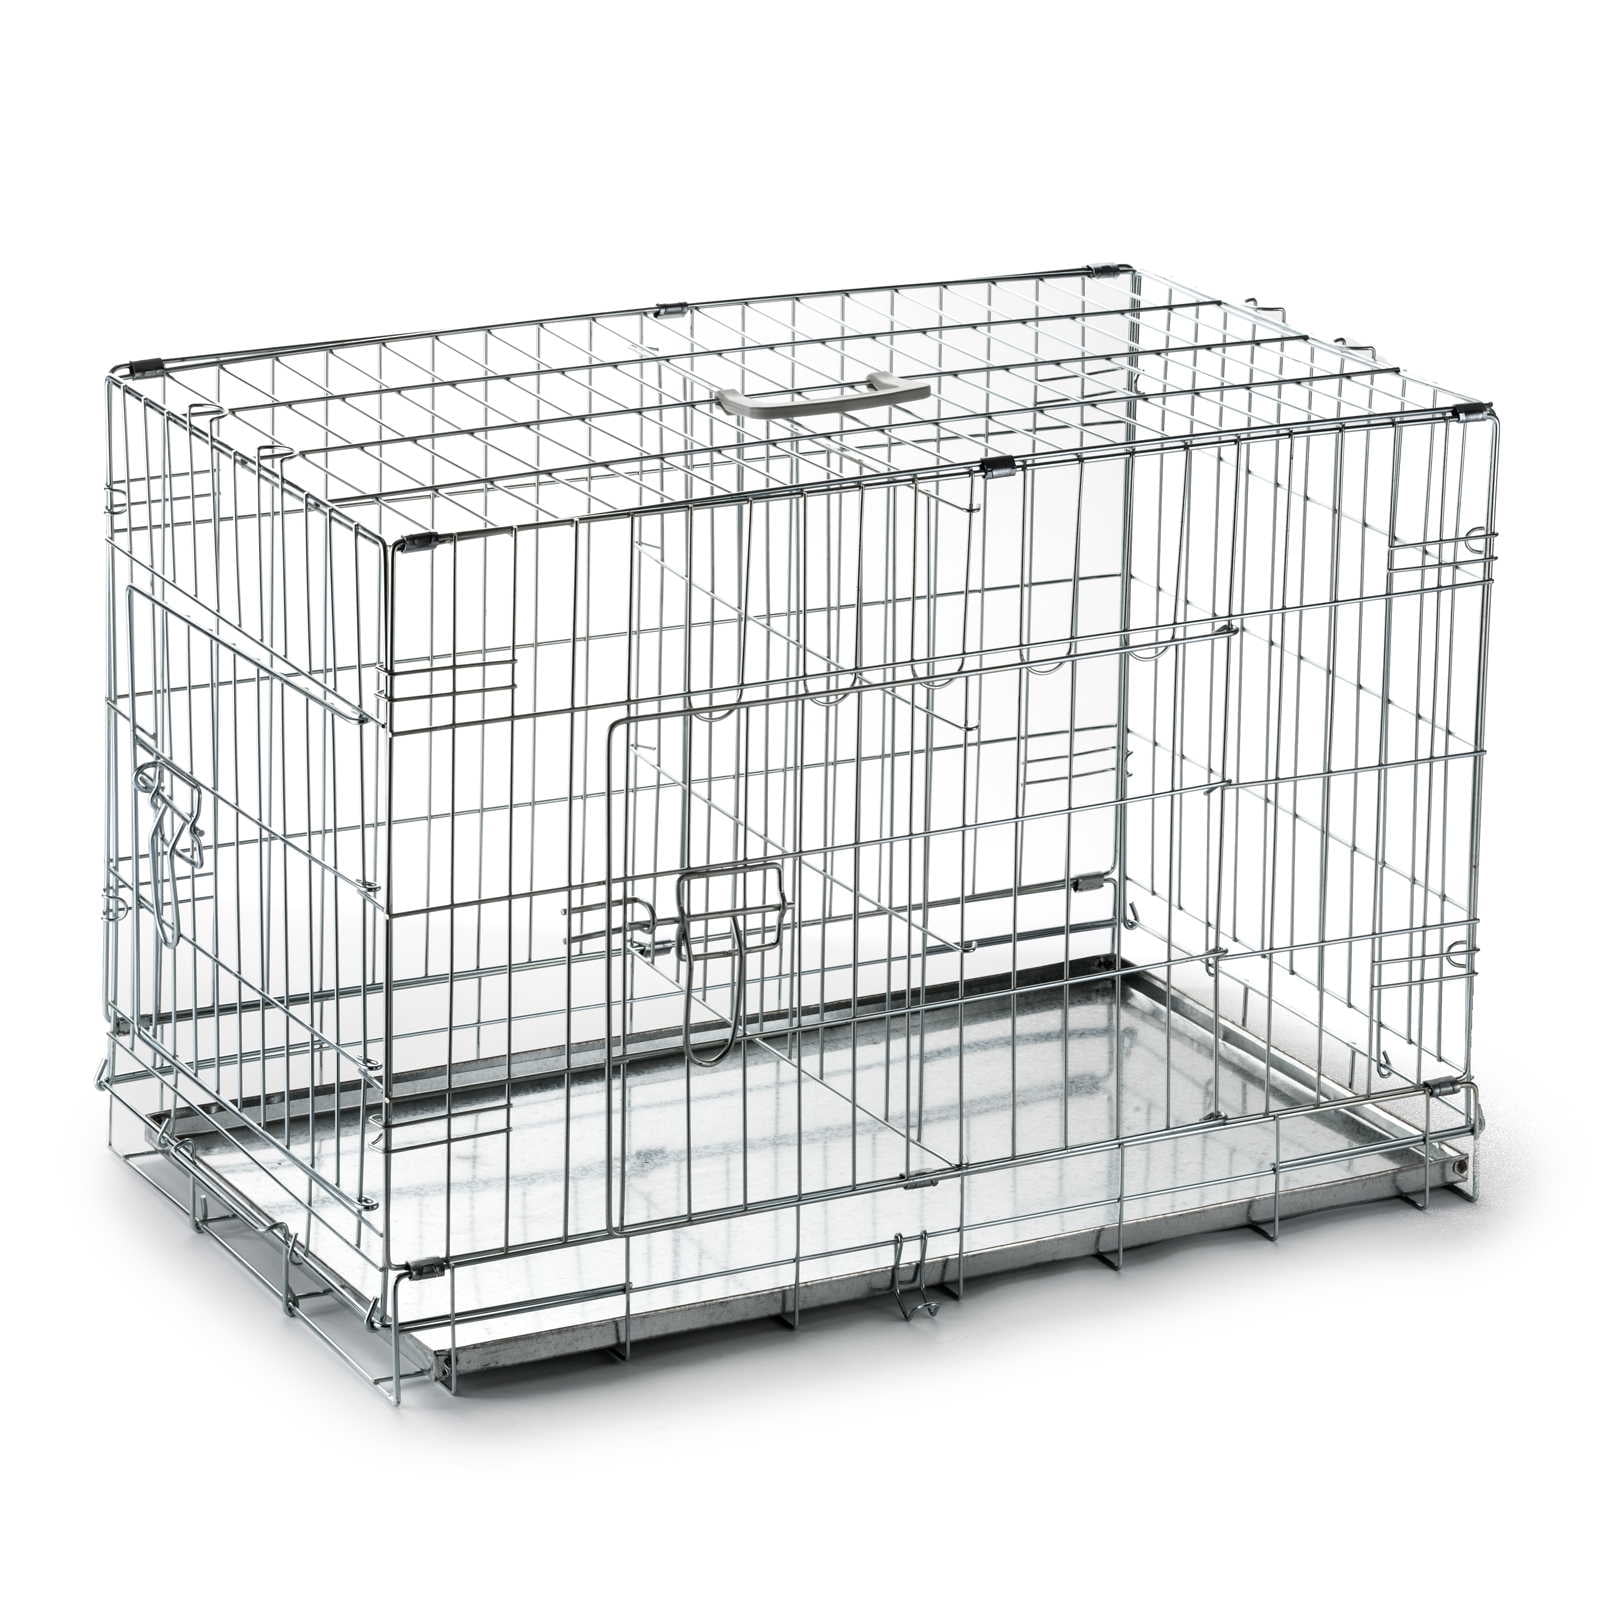 silver dog crate